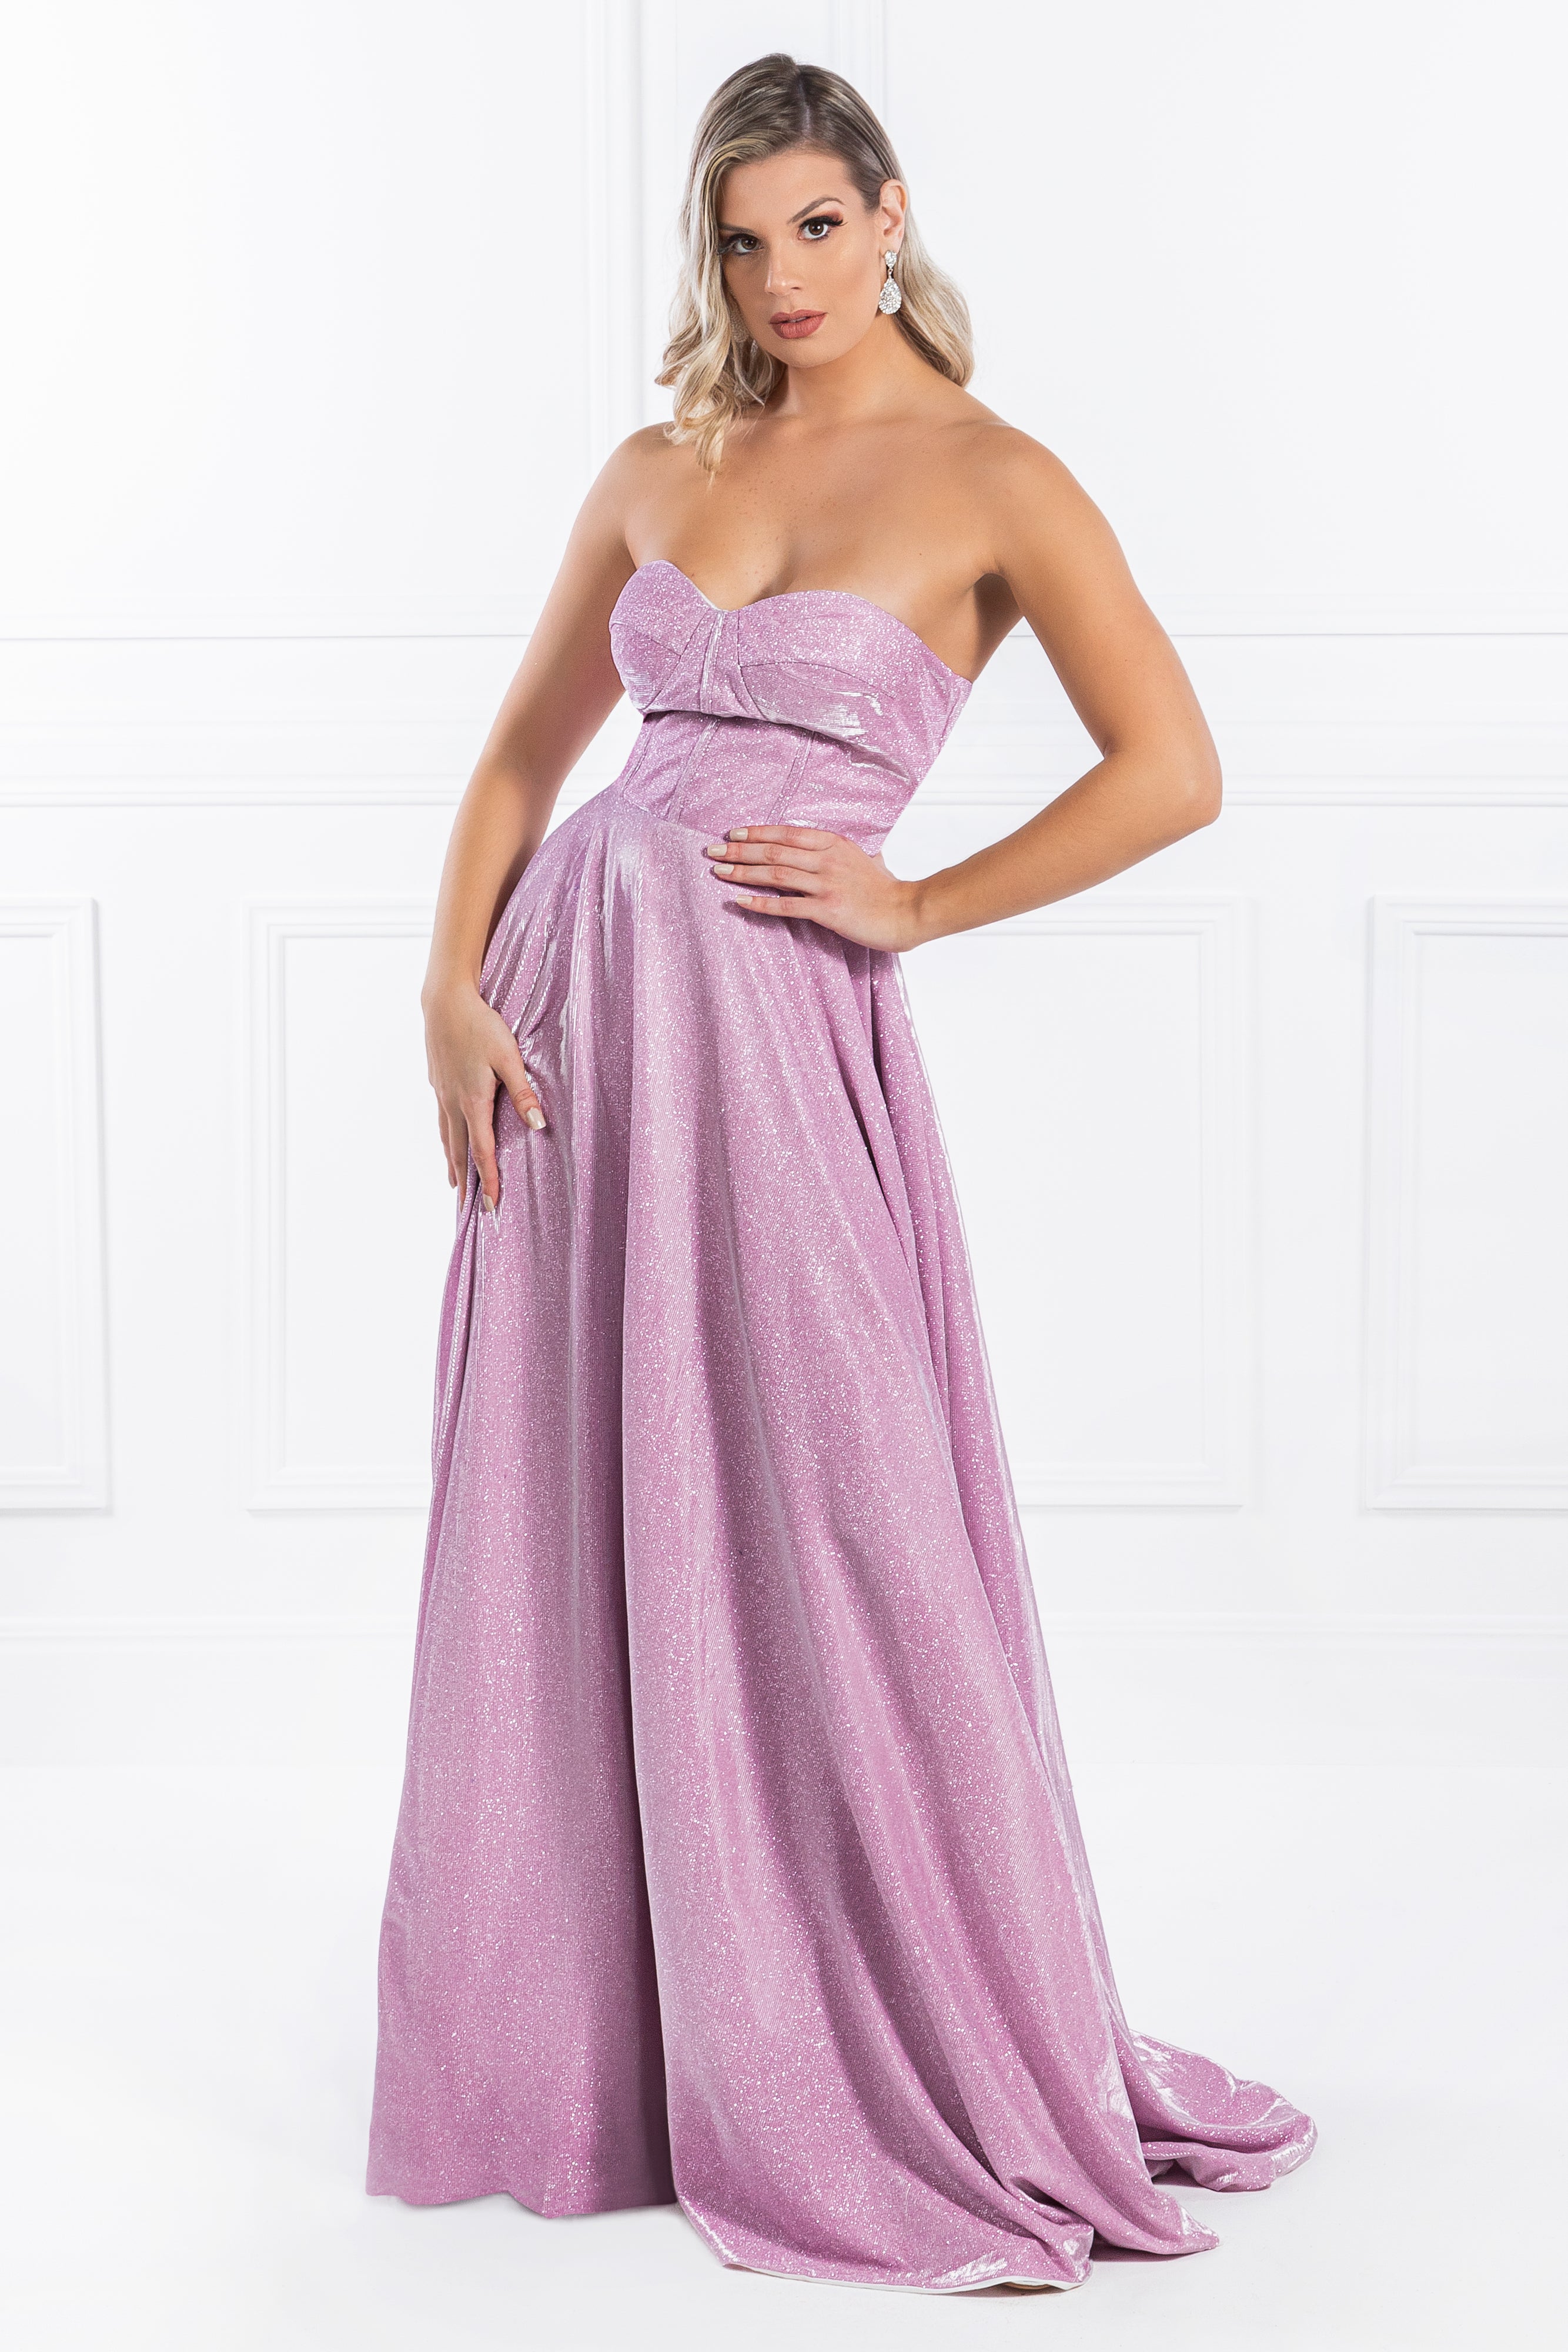 Honey Couture FLORENCE Strapless Bustier Shimmer Made To Order Formal Gown